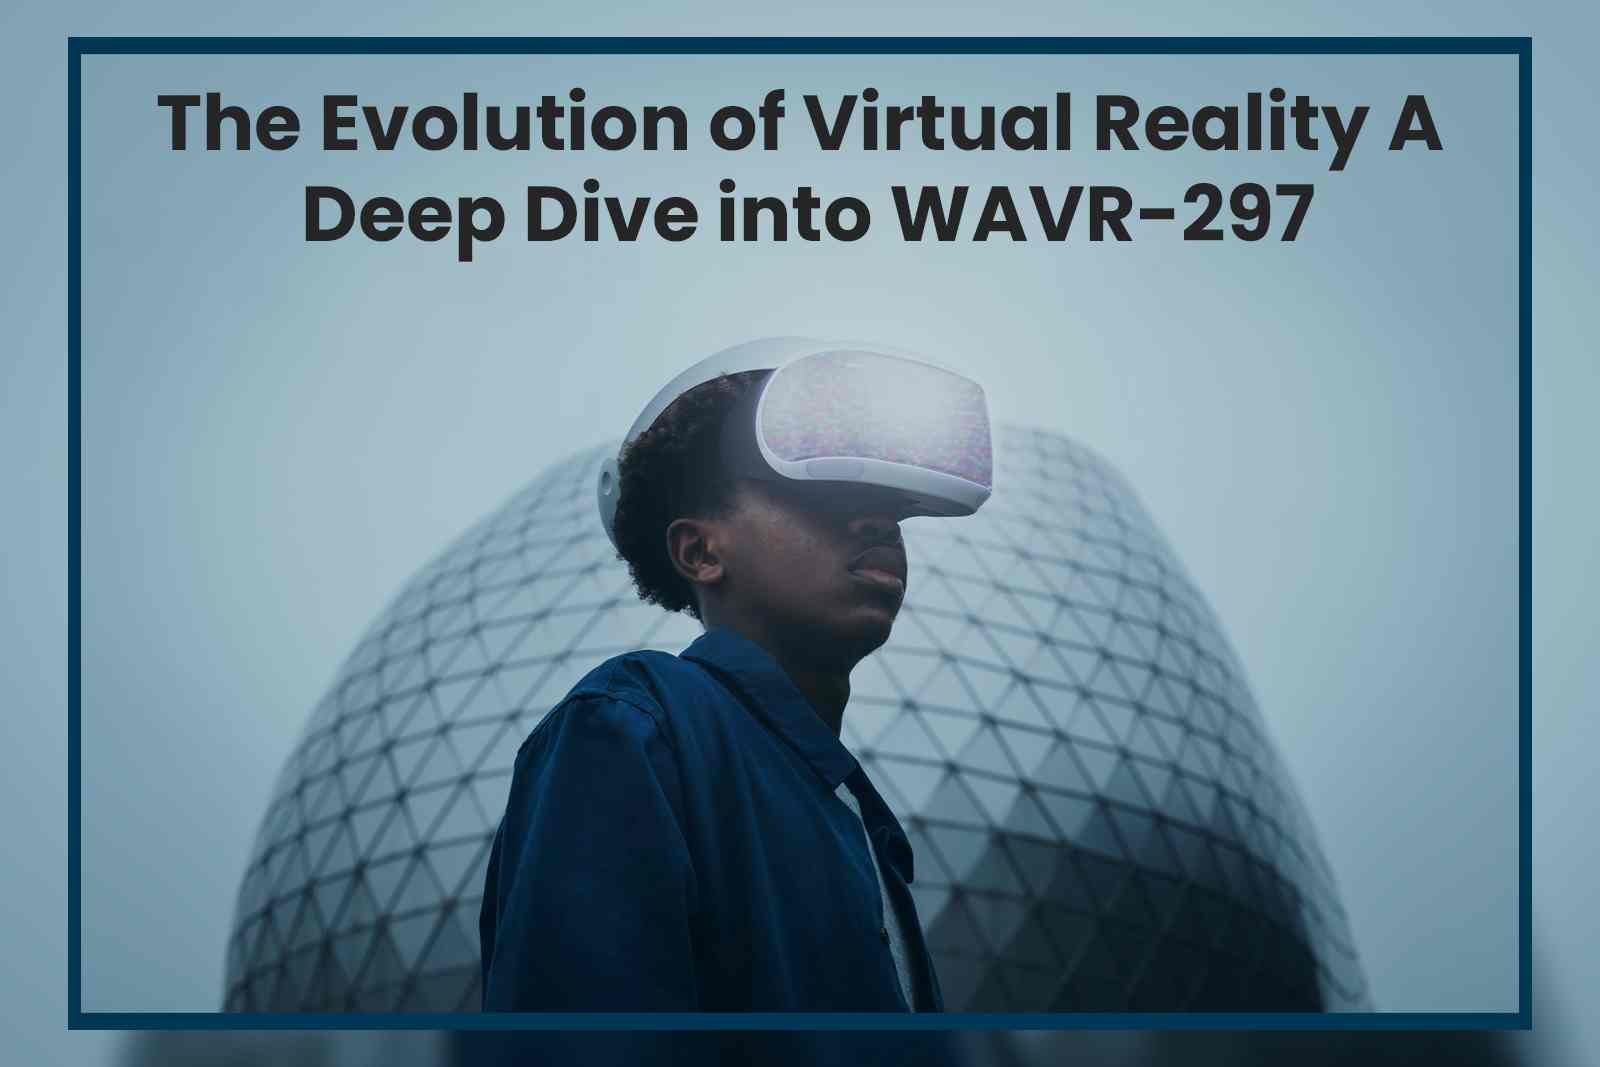 The Evolution of Virtual Reality A Deep Dive into WAVR-297